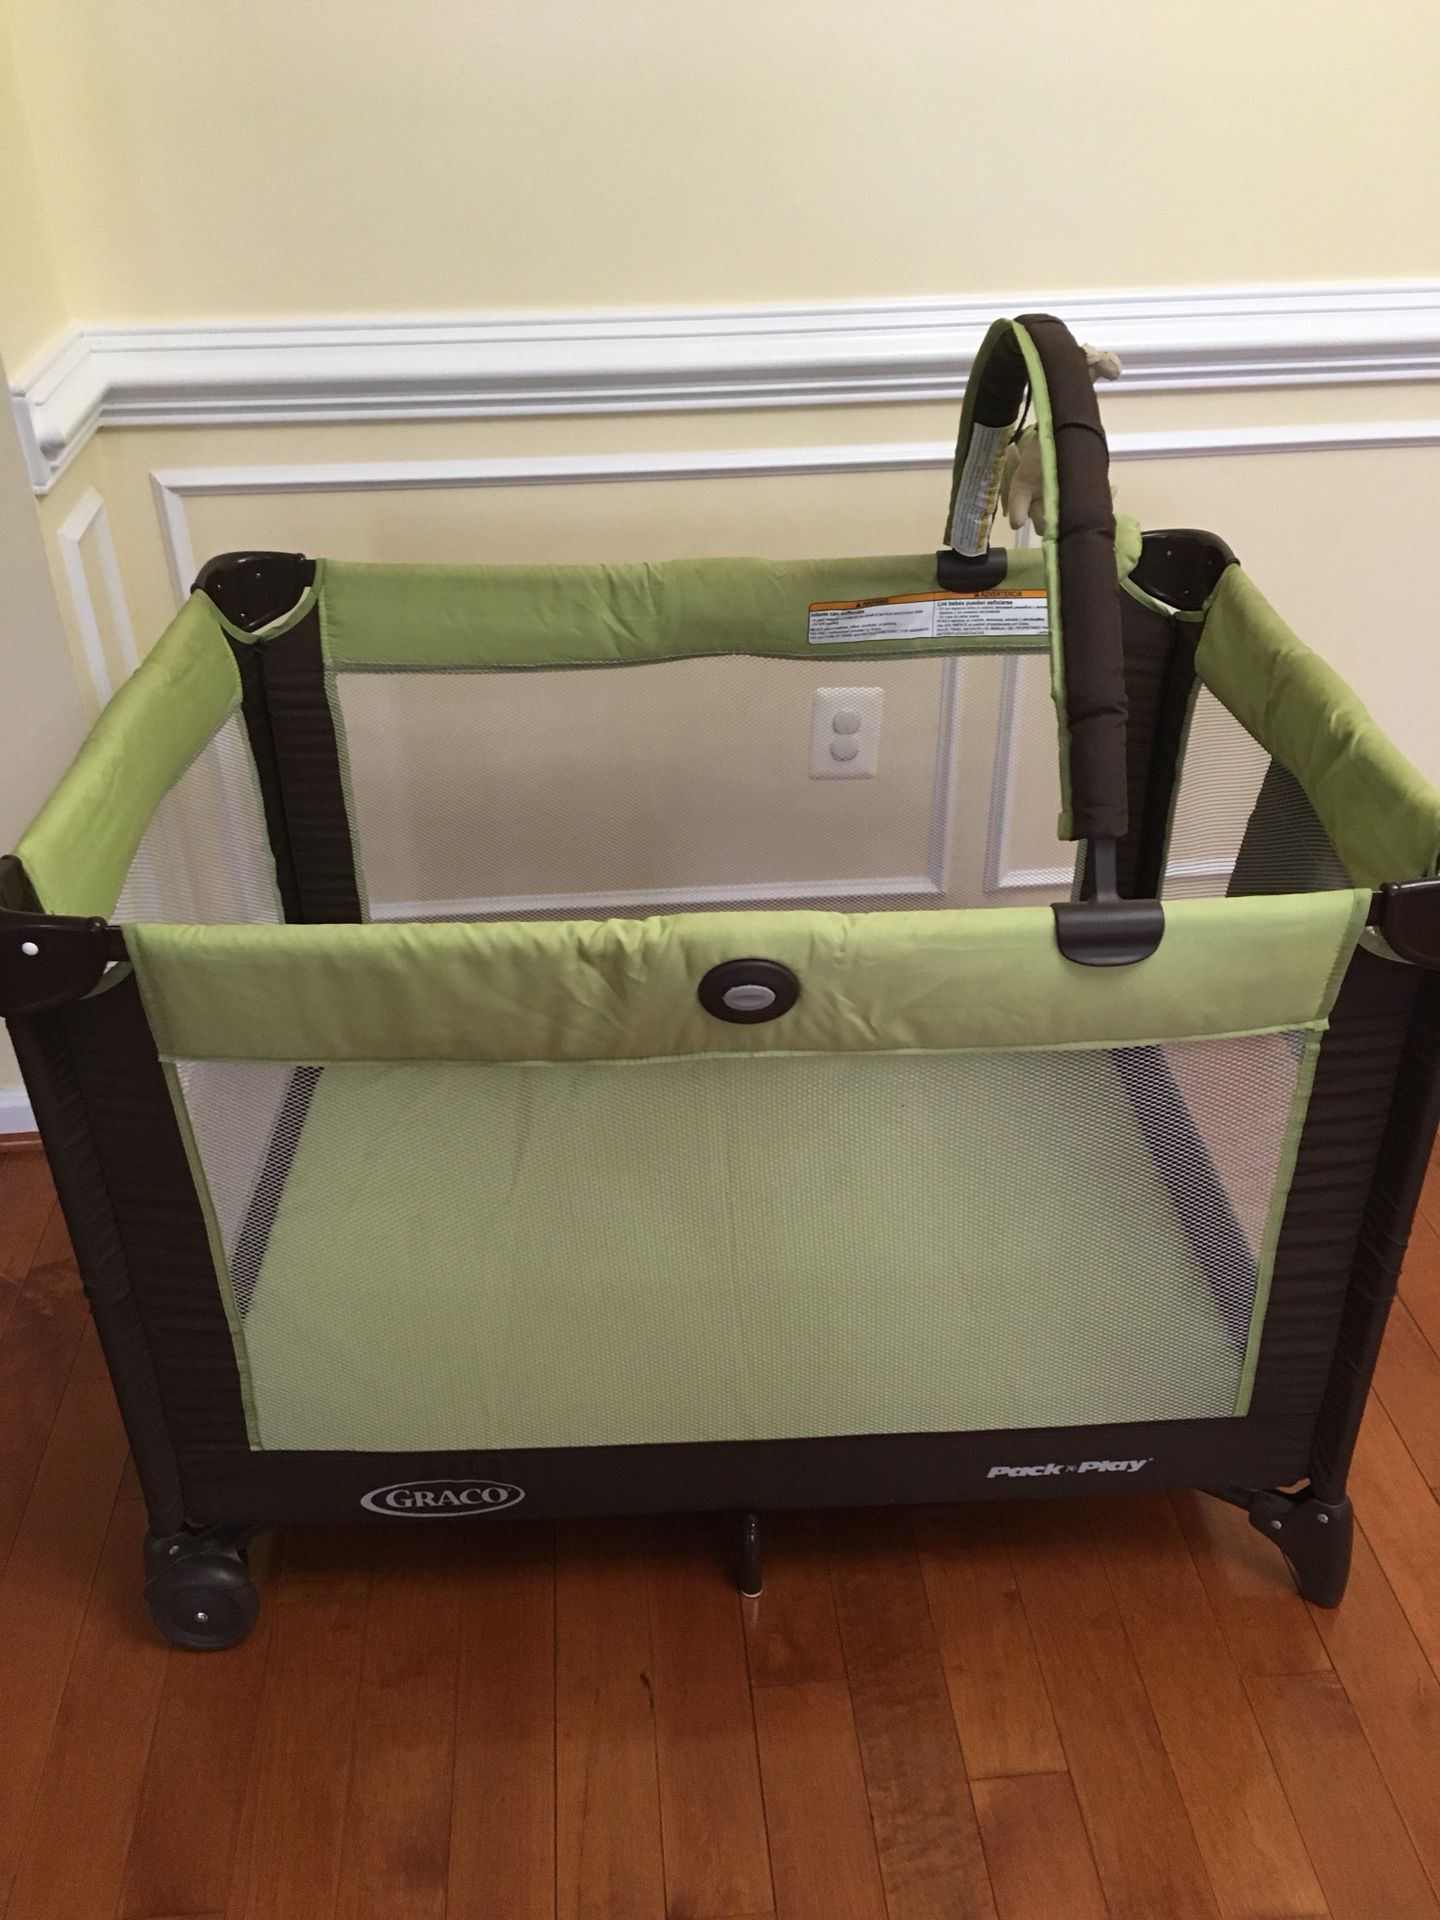 Graco pack n play with mattress,waterproof protector and cotton fitted sheet